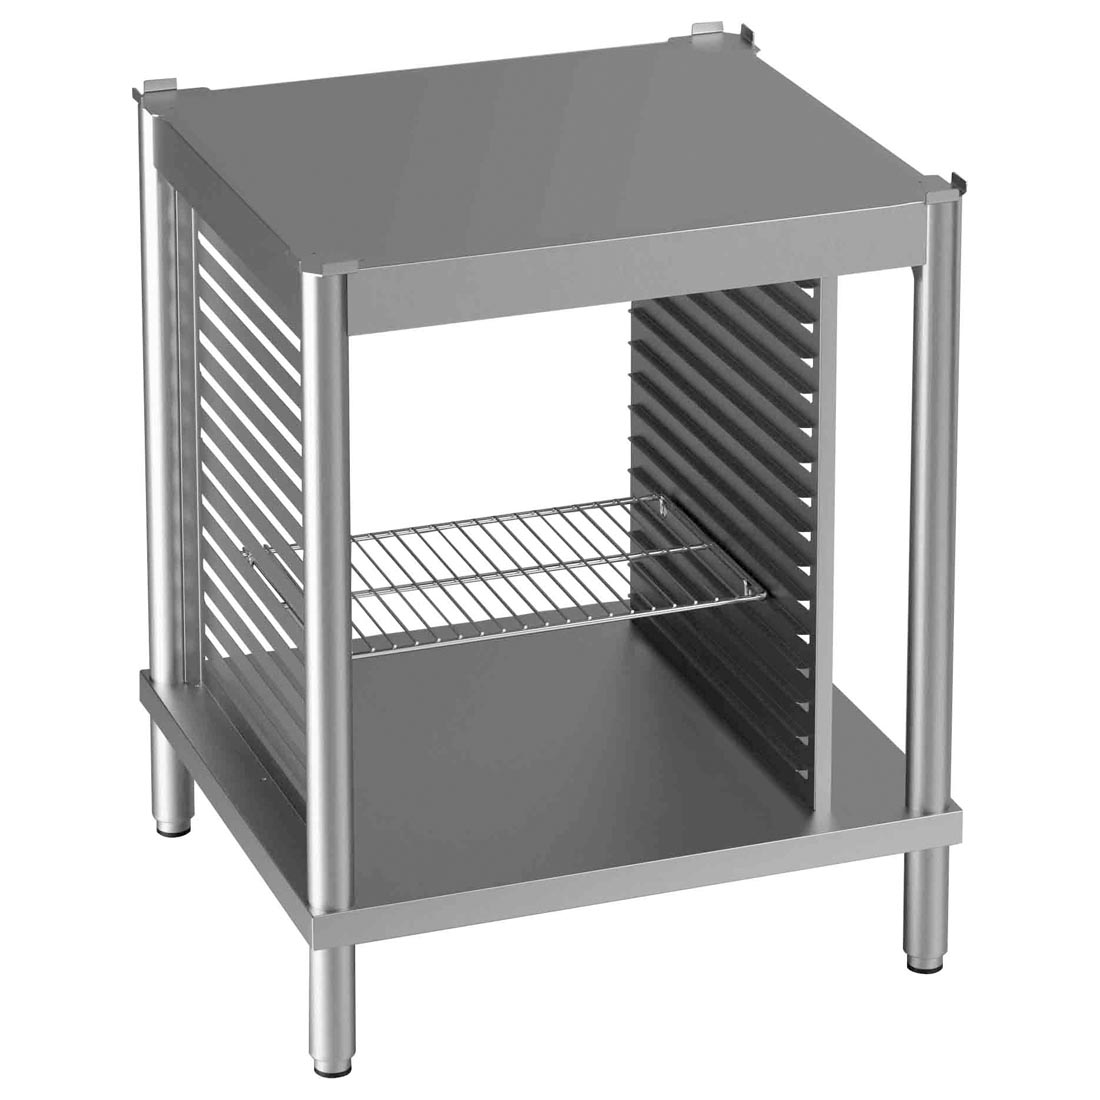 WR-10-11-PJ Combimax Oven Stand